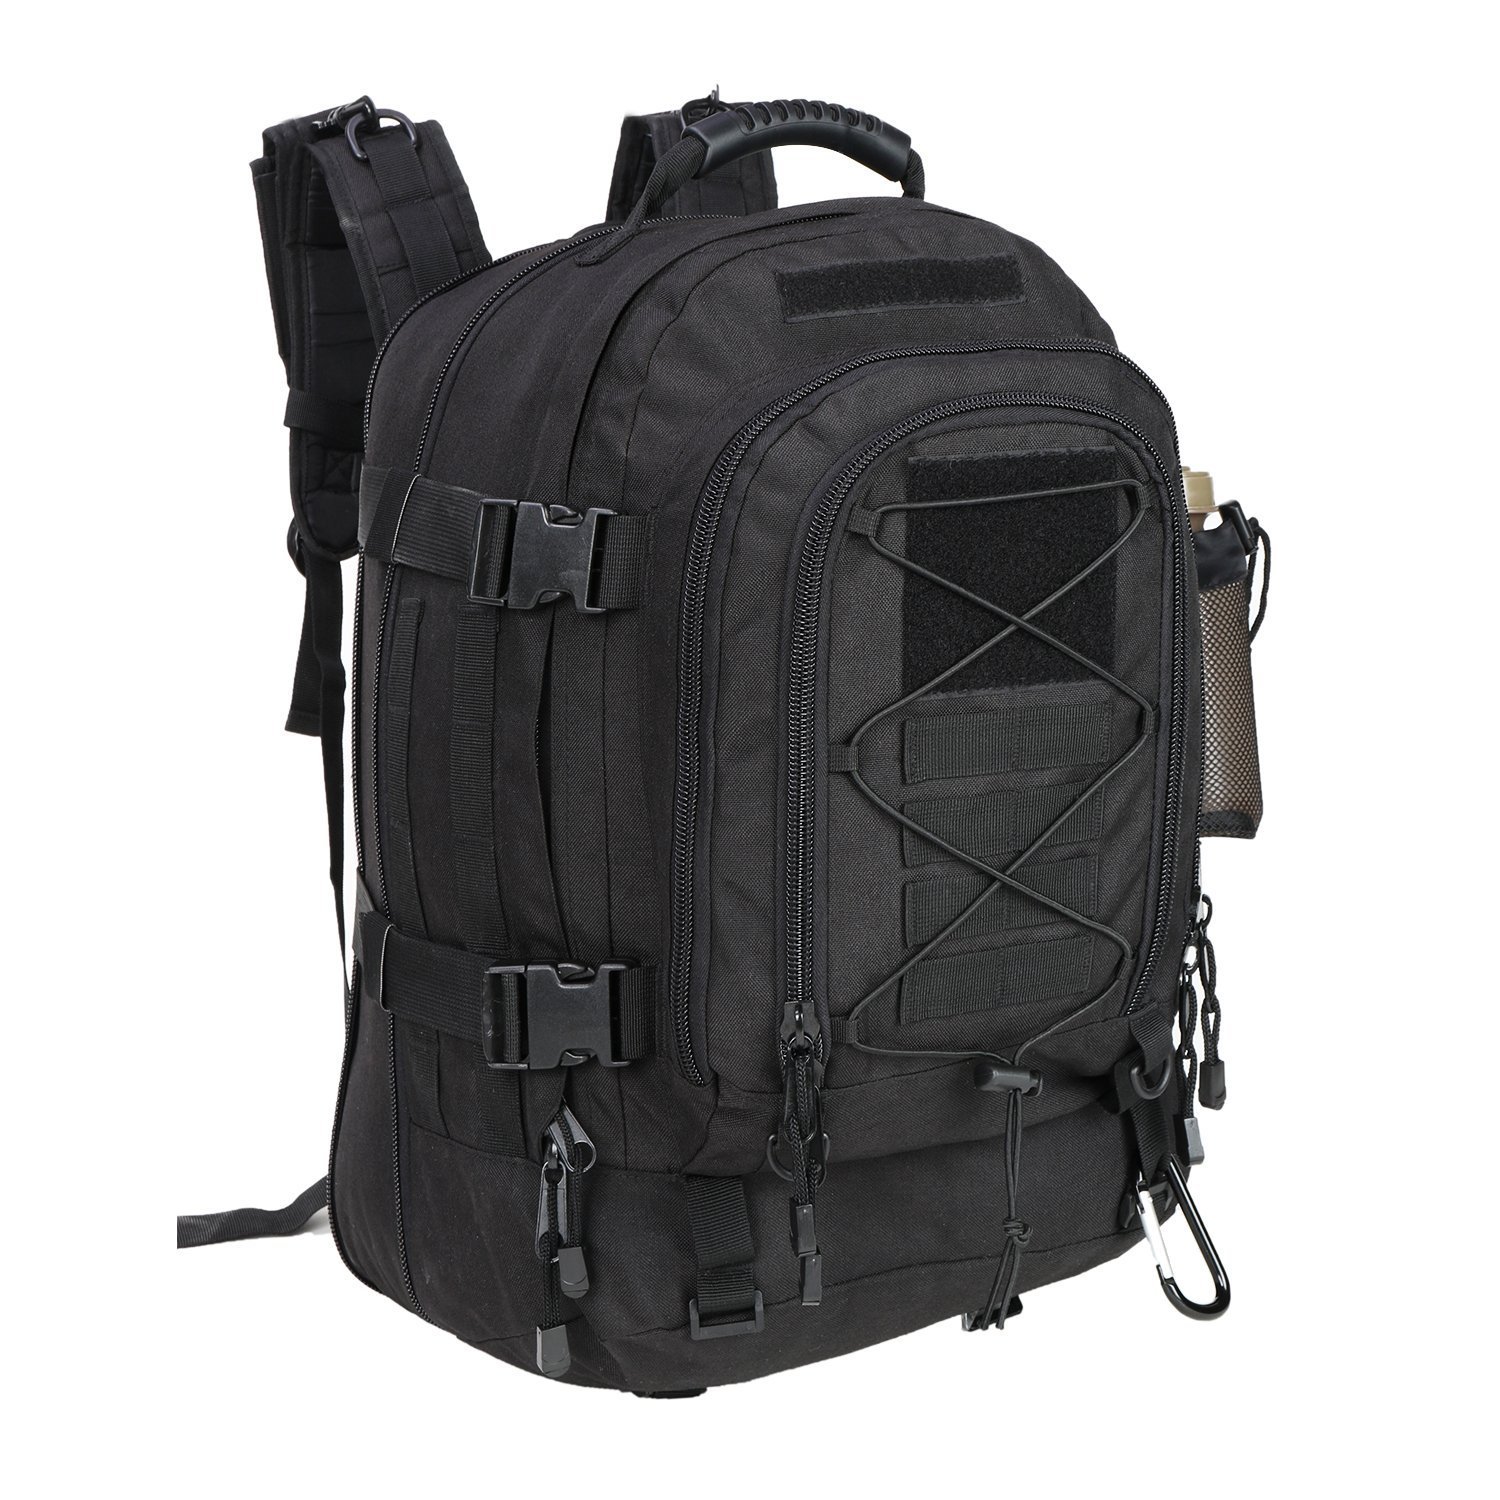 64L Airforce & Military Backpack for Camping & Hiking